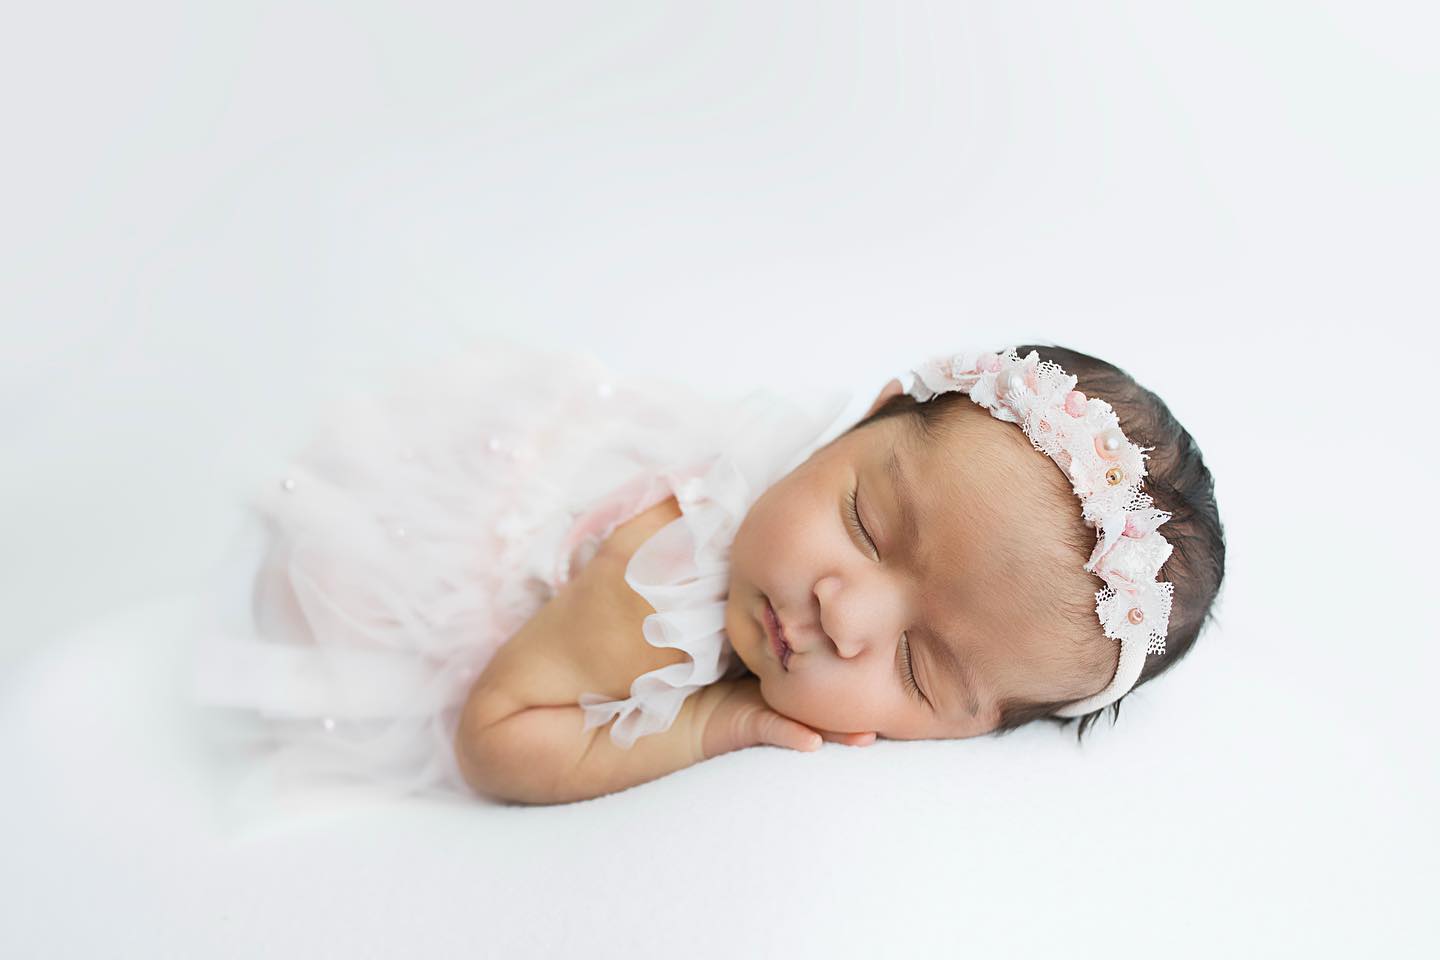 Such a sweet baby girl! 

Outfit and Headband by @sunkissedprops 

Please note that I am currently taking due dates up to December.

#oshawanewbornphotographer
#oshawaphotographer #whitbynewbornphotographer #ajaxnewbornphotographer #bowmanvillenewbornphotographer #oshawanewbornphotography #oshawamoms #durhamregionmoms #gtanewbornphotographer #gtanewbornphotography #gtaphotographer #canadiannewbornphotographer